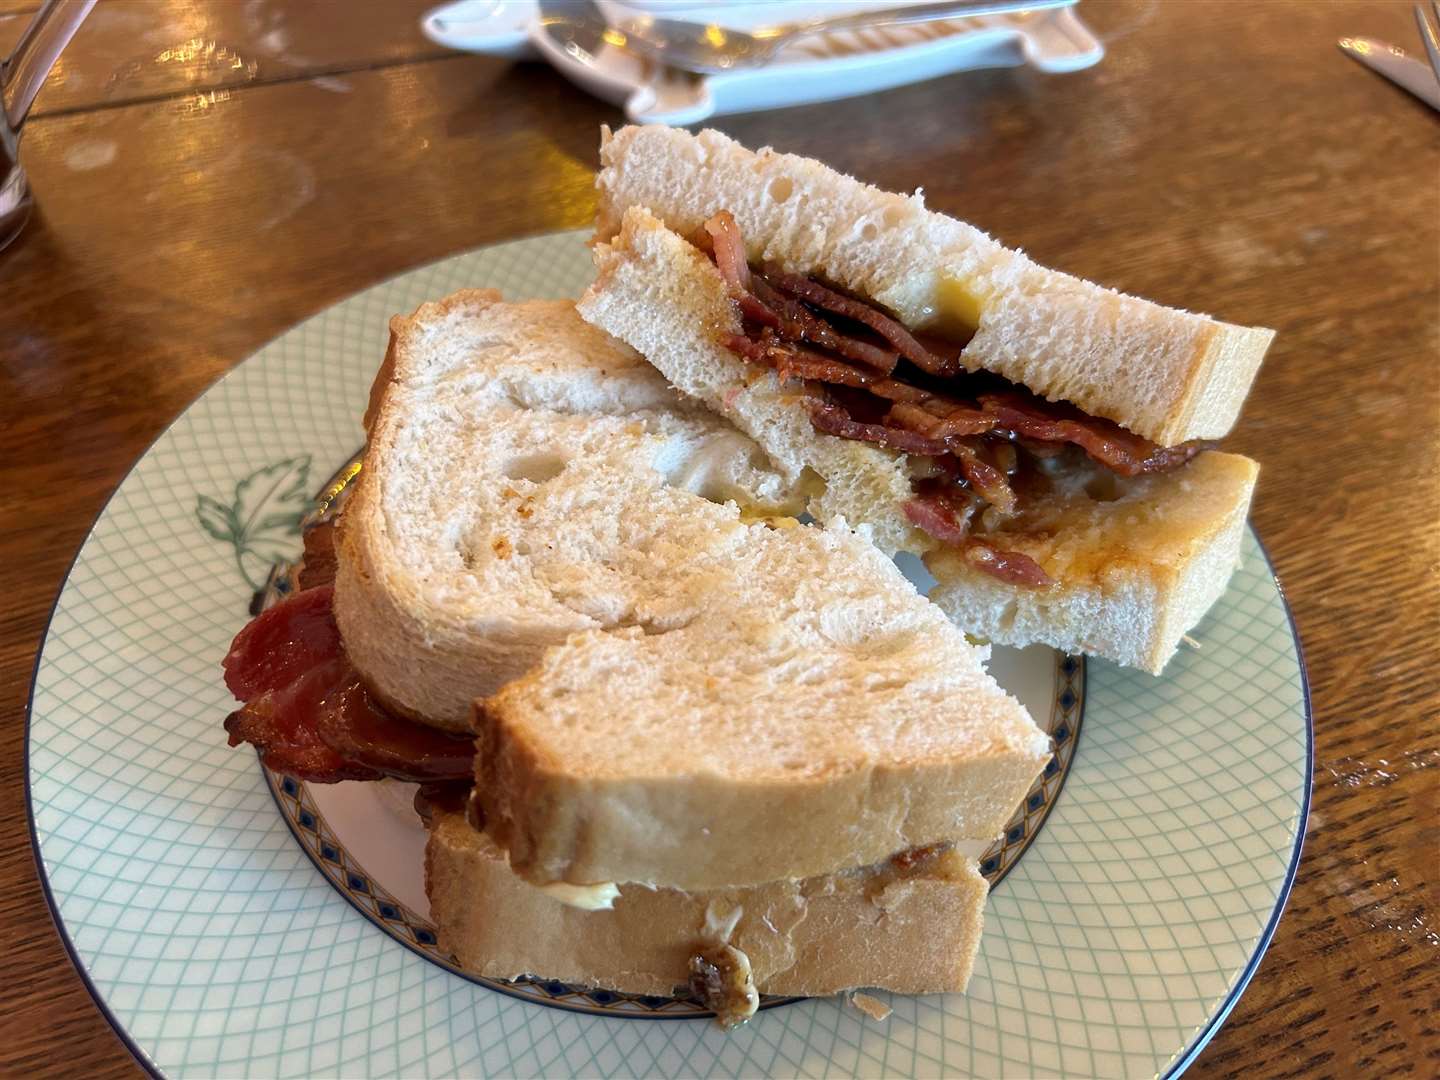 This bacon sandwich from The Dog House in Sandgate is the best I have ever had